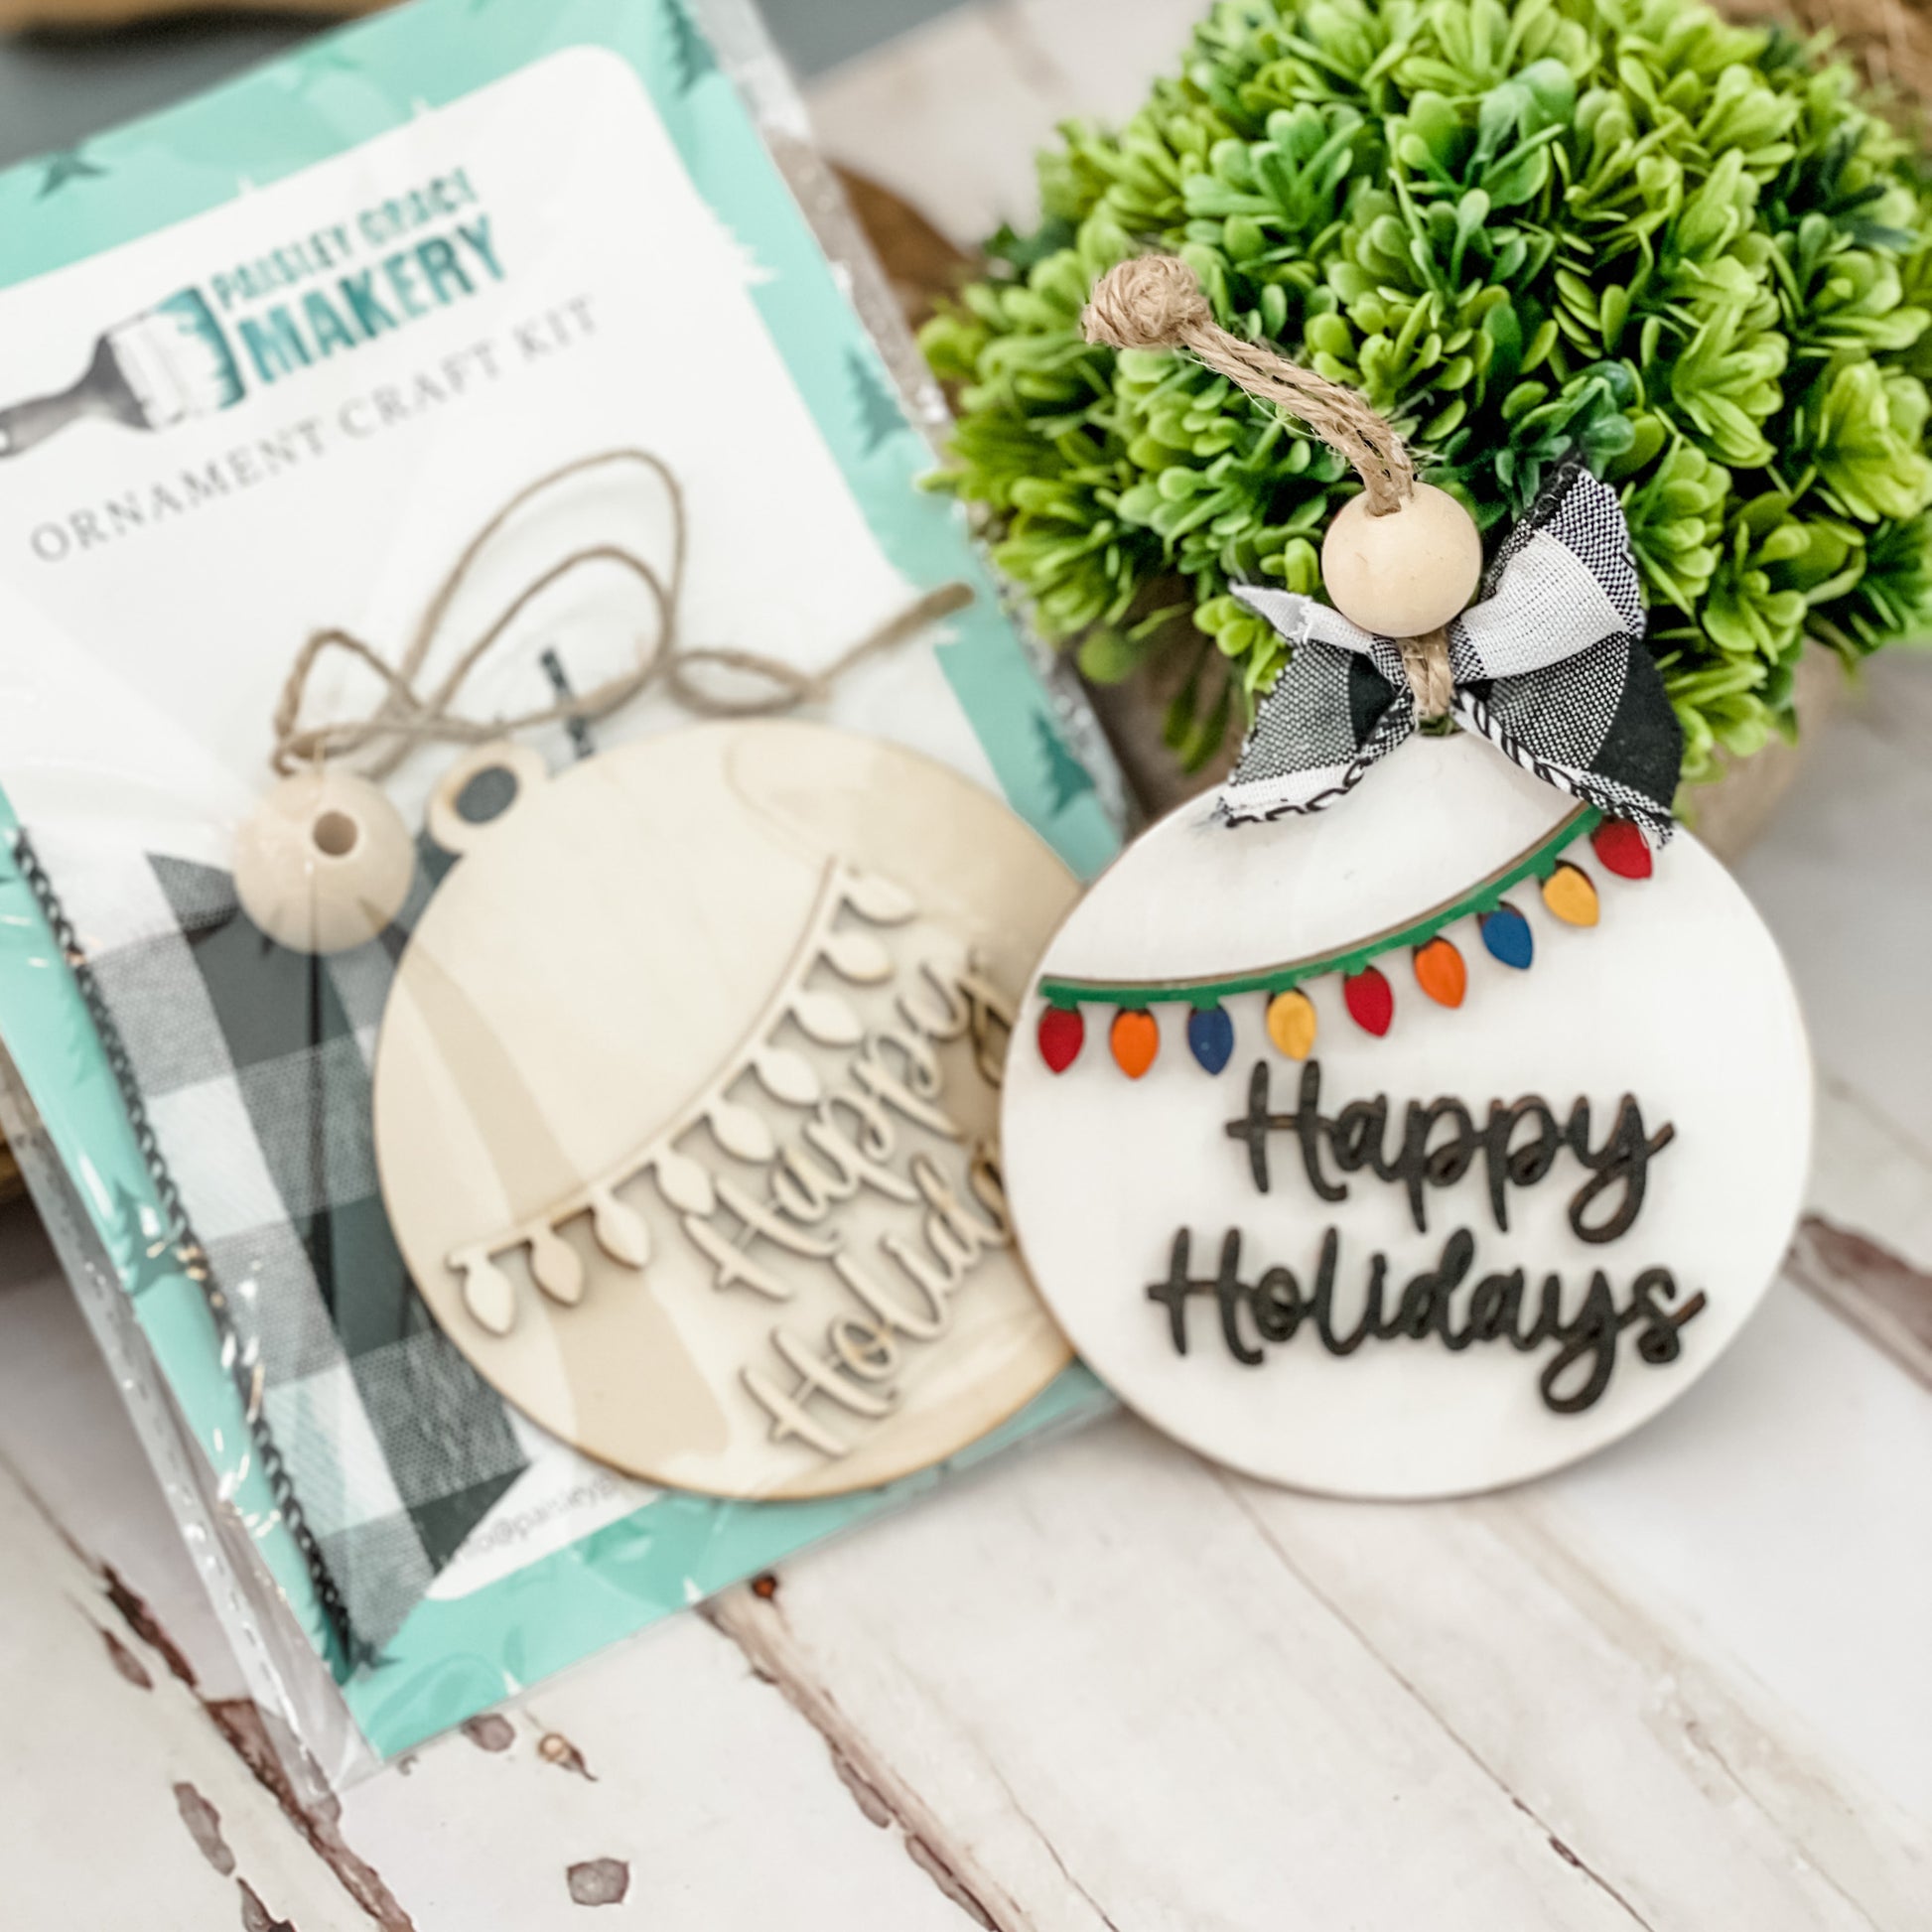 Happy Holidays with Lights Ornament Craft Set - Paisley Grace Makery